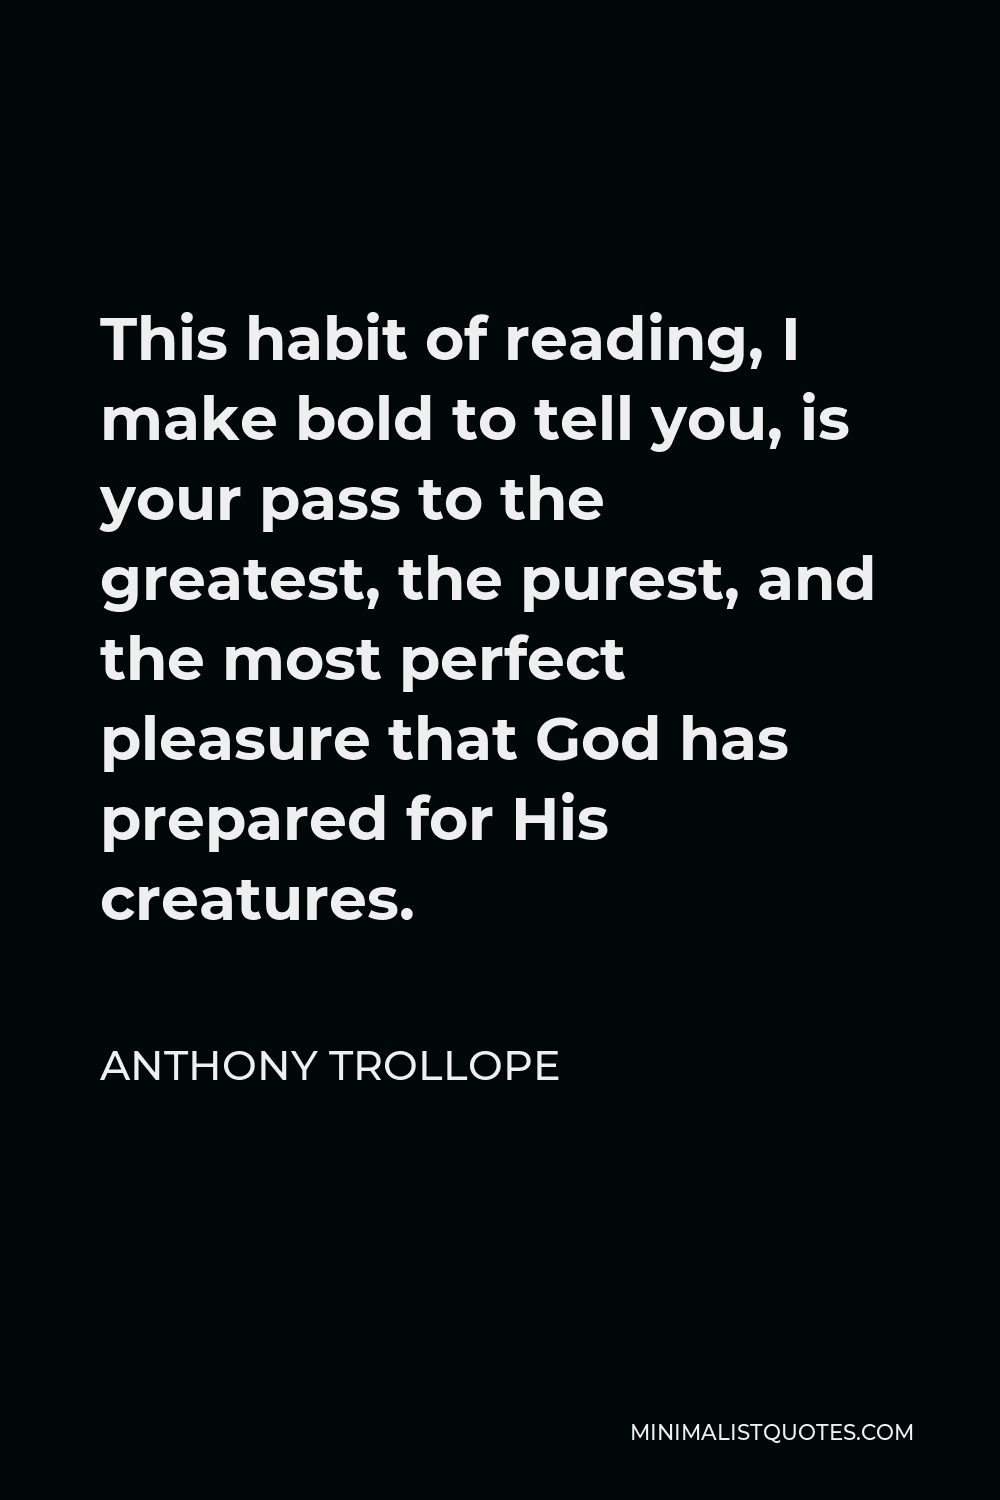 Anthony Trollope Quote - This habit of reading, I make bold to tell you, is your pass to the greatest, the purest, and the most perfect pleasure that God has prepared for His creatures.